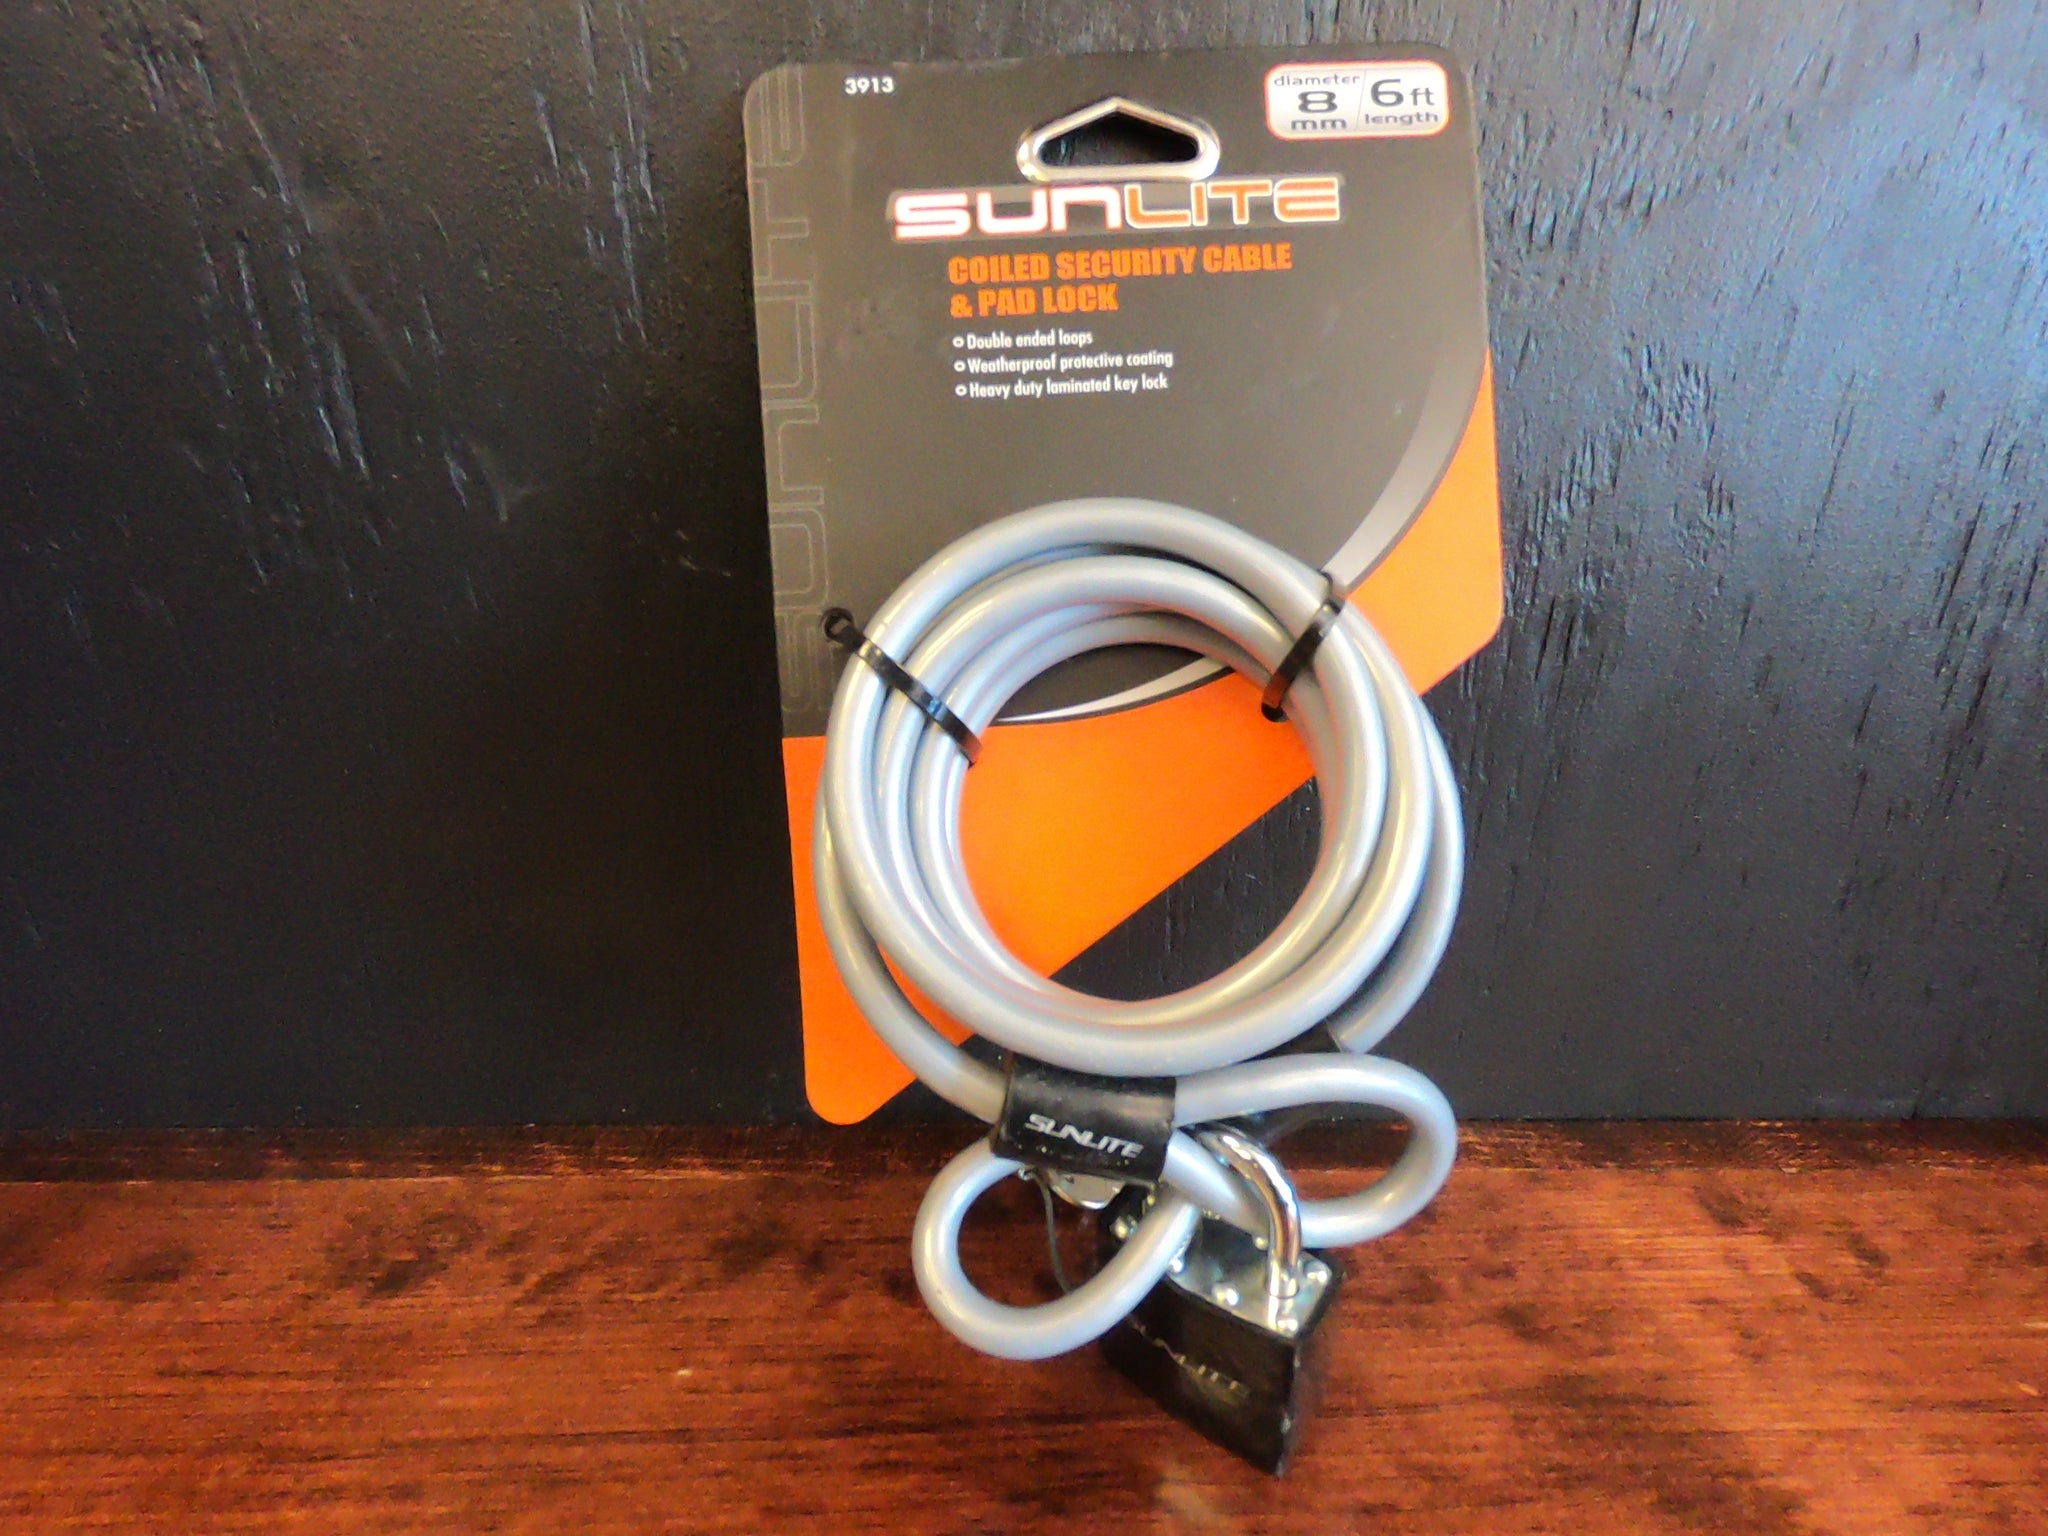 Sunlite coiled security cable & pad lock